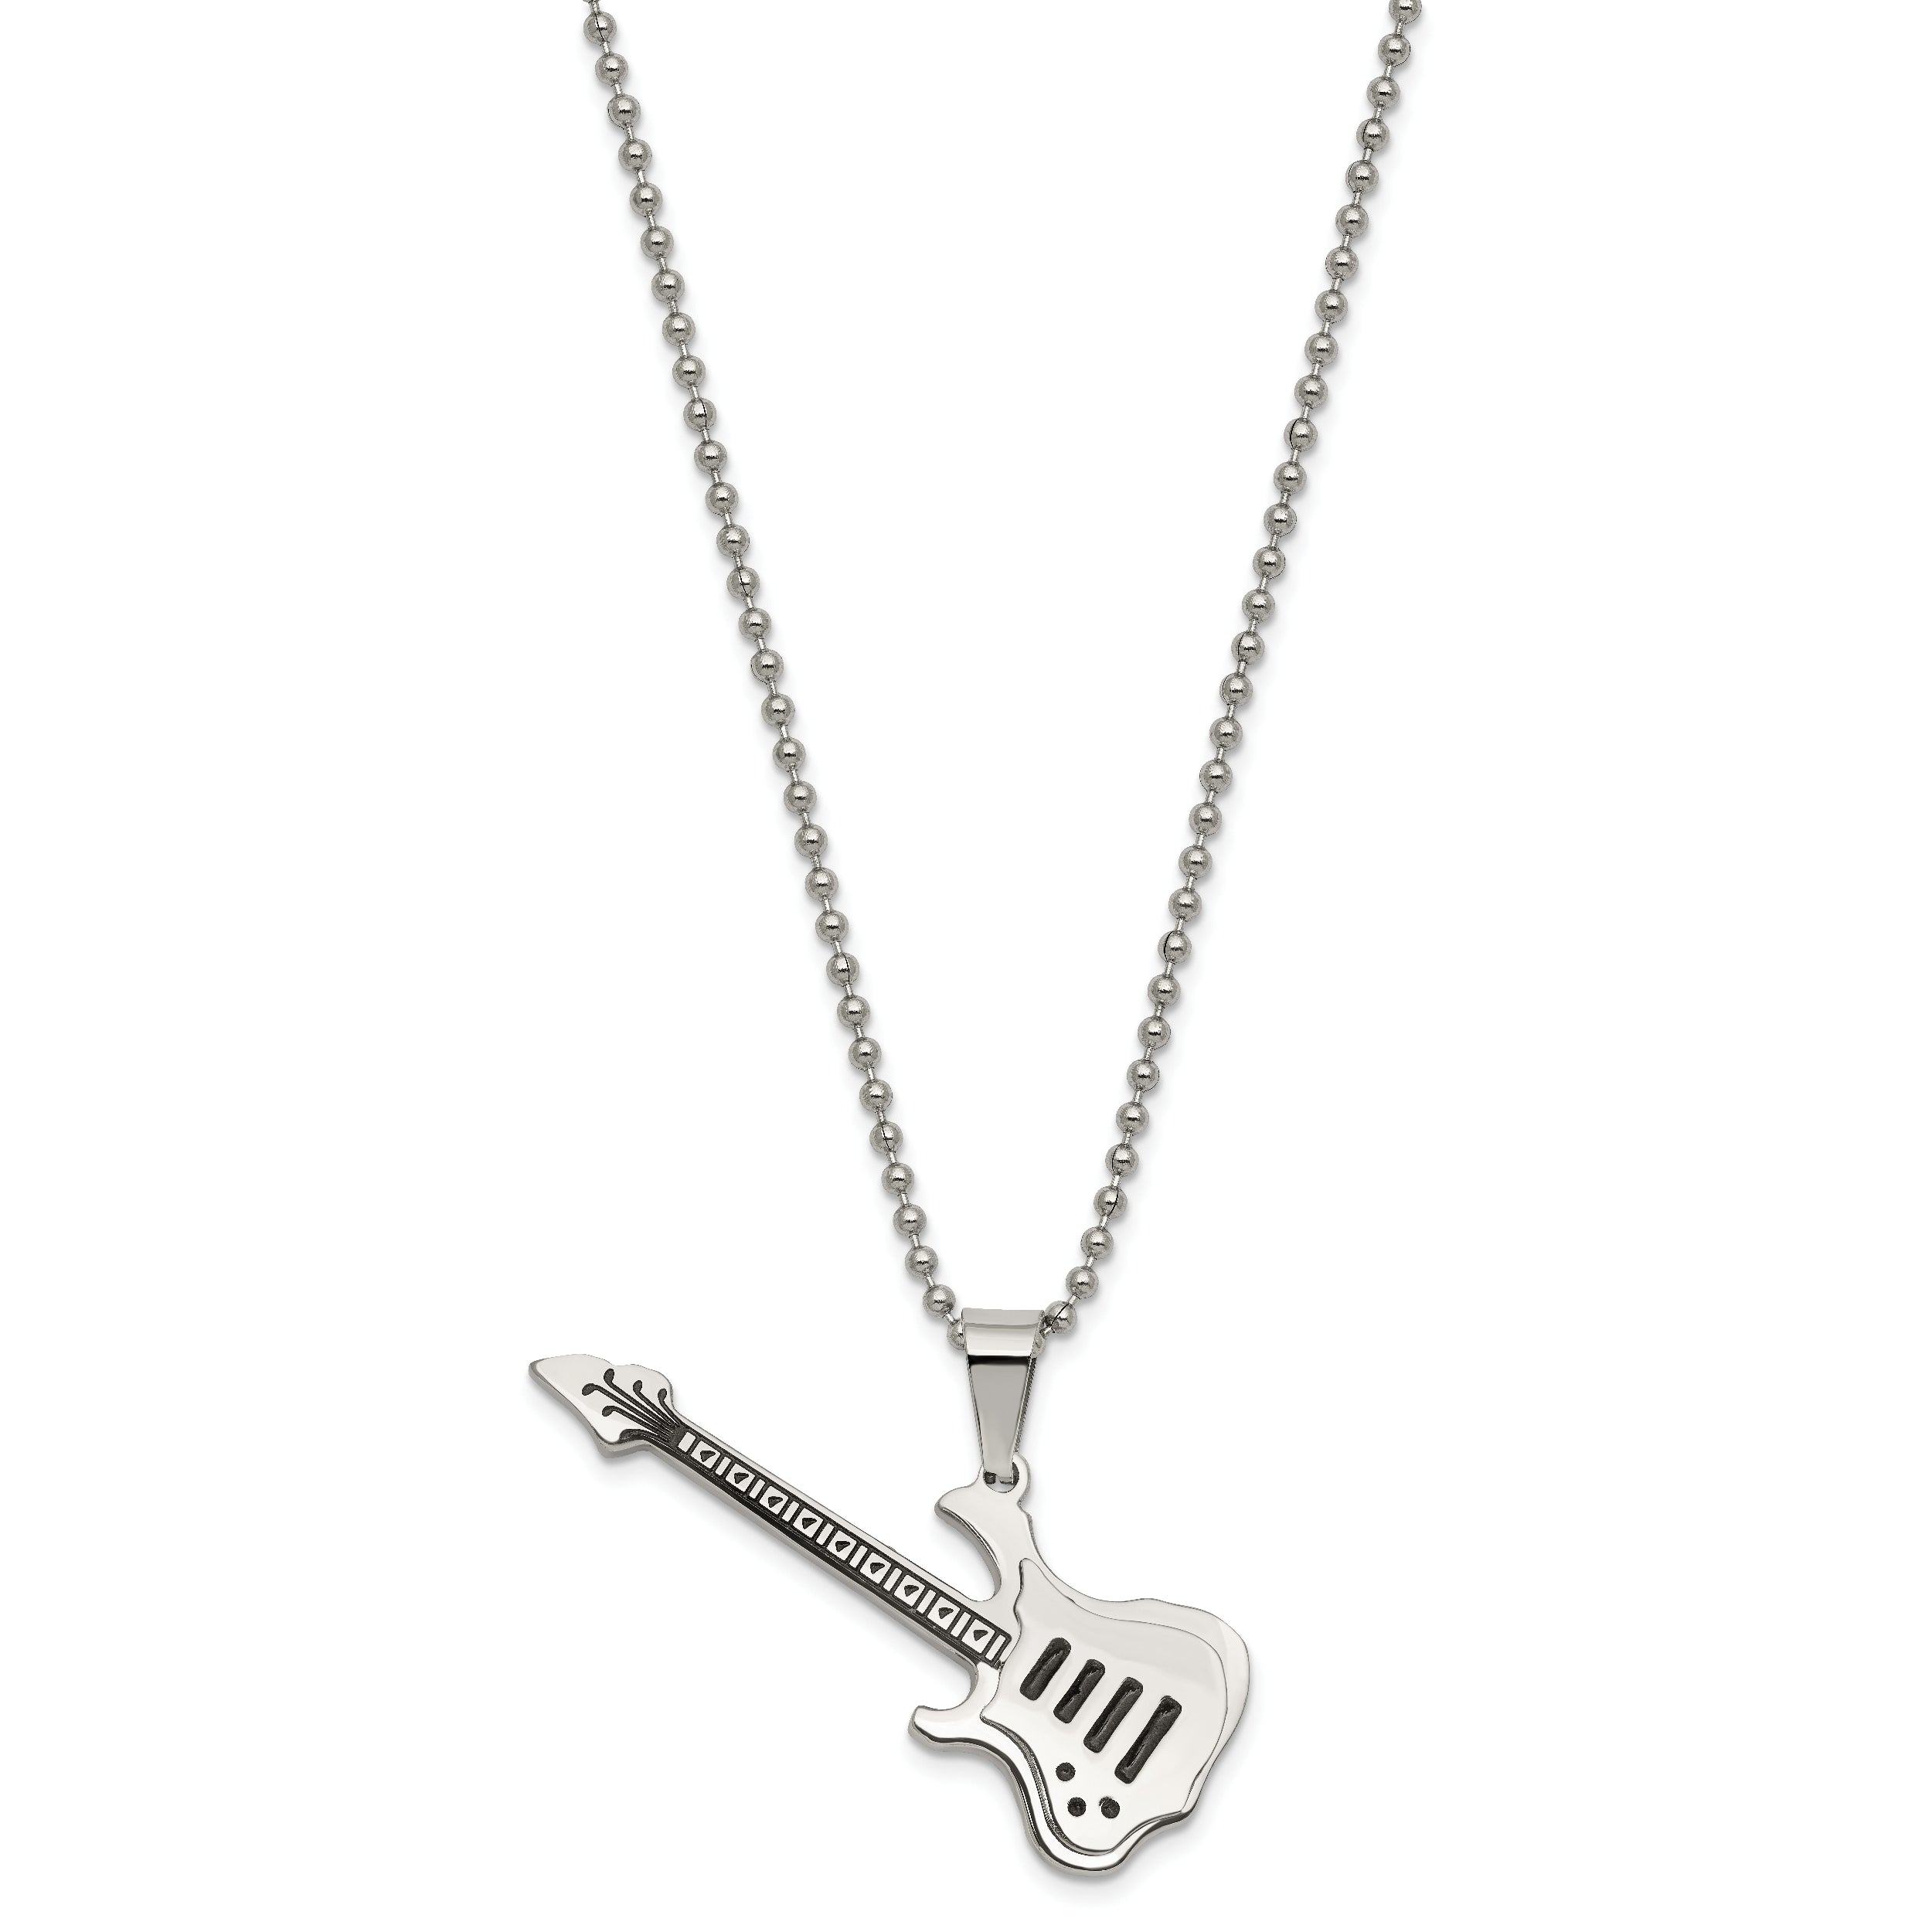 Chisel Stainless Steel Polished and Textured with Enamel Guitar Pendant on a 24 inch Ball Chain Necklace